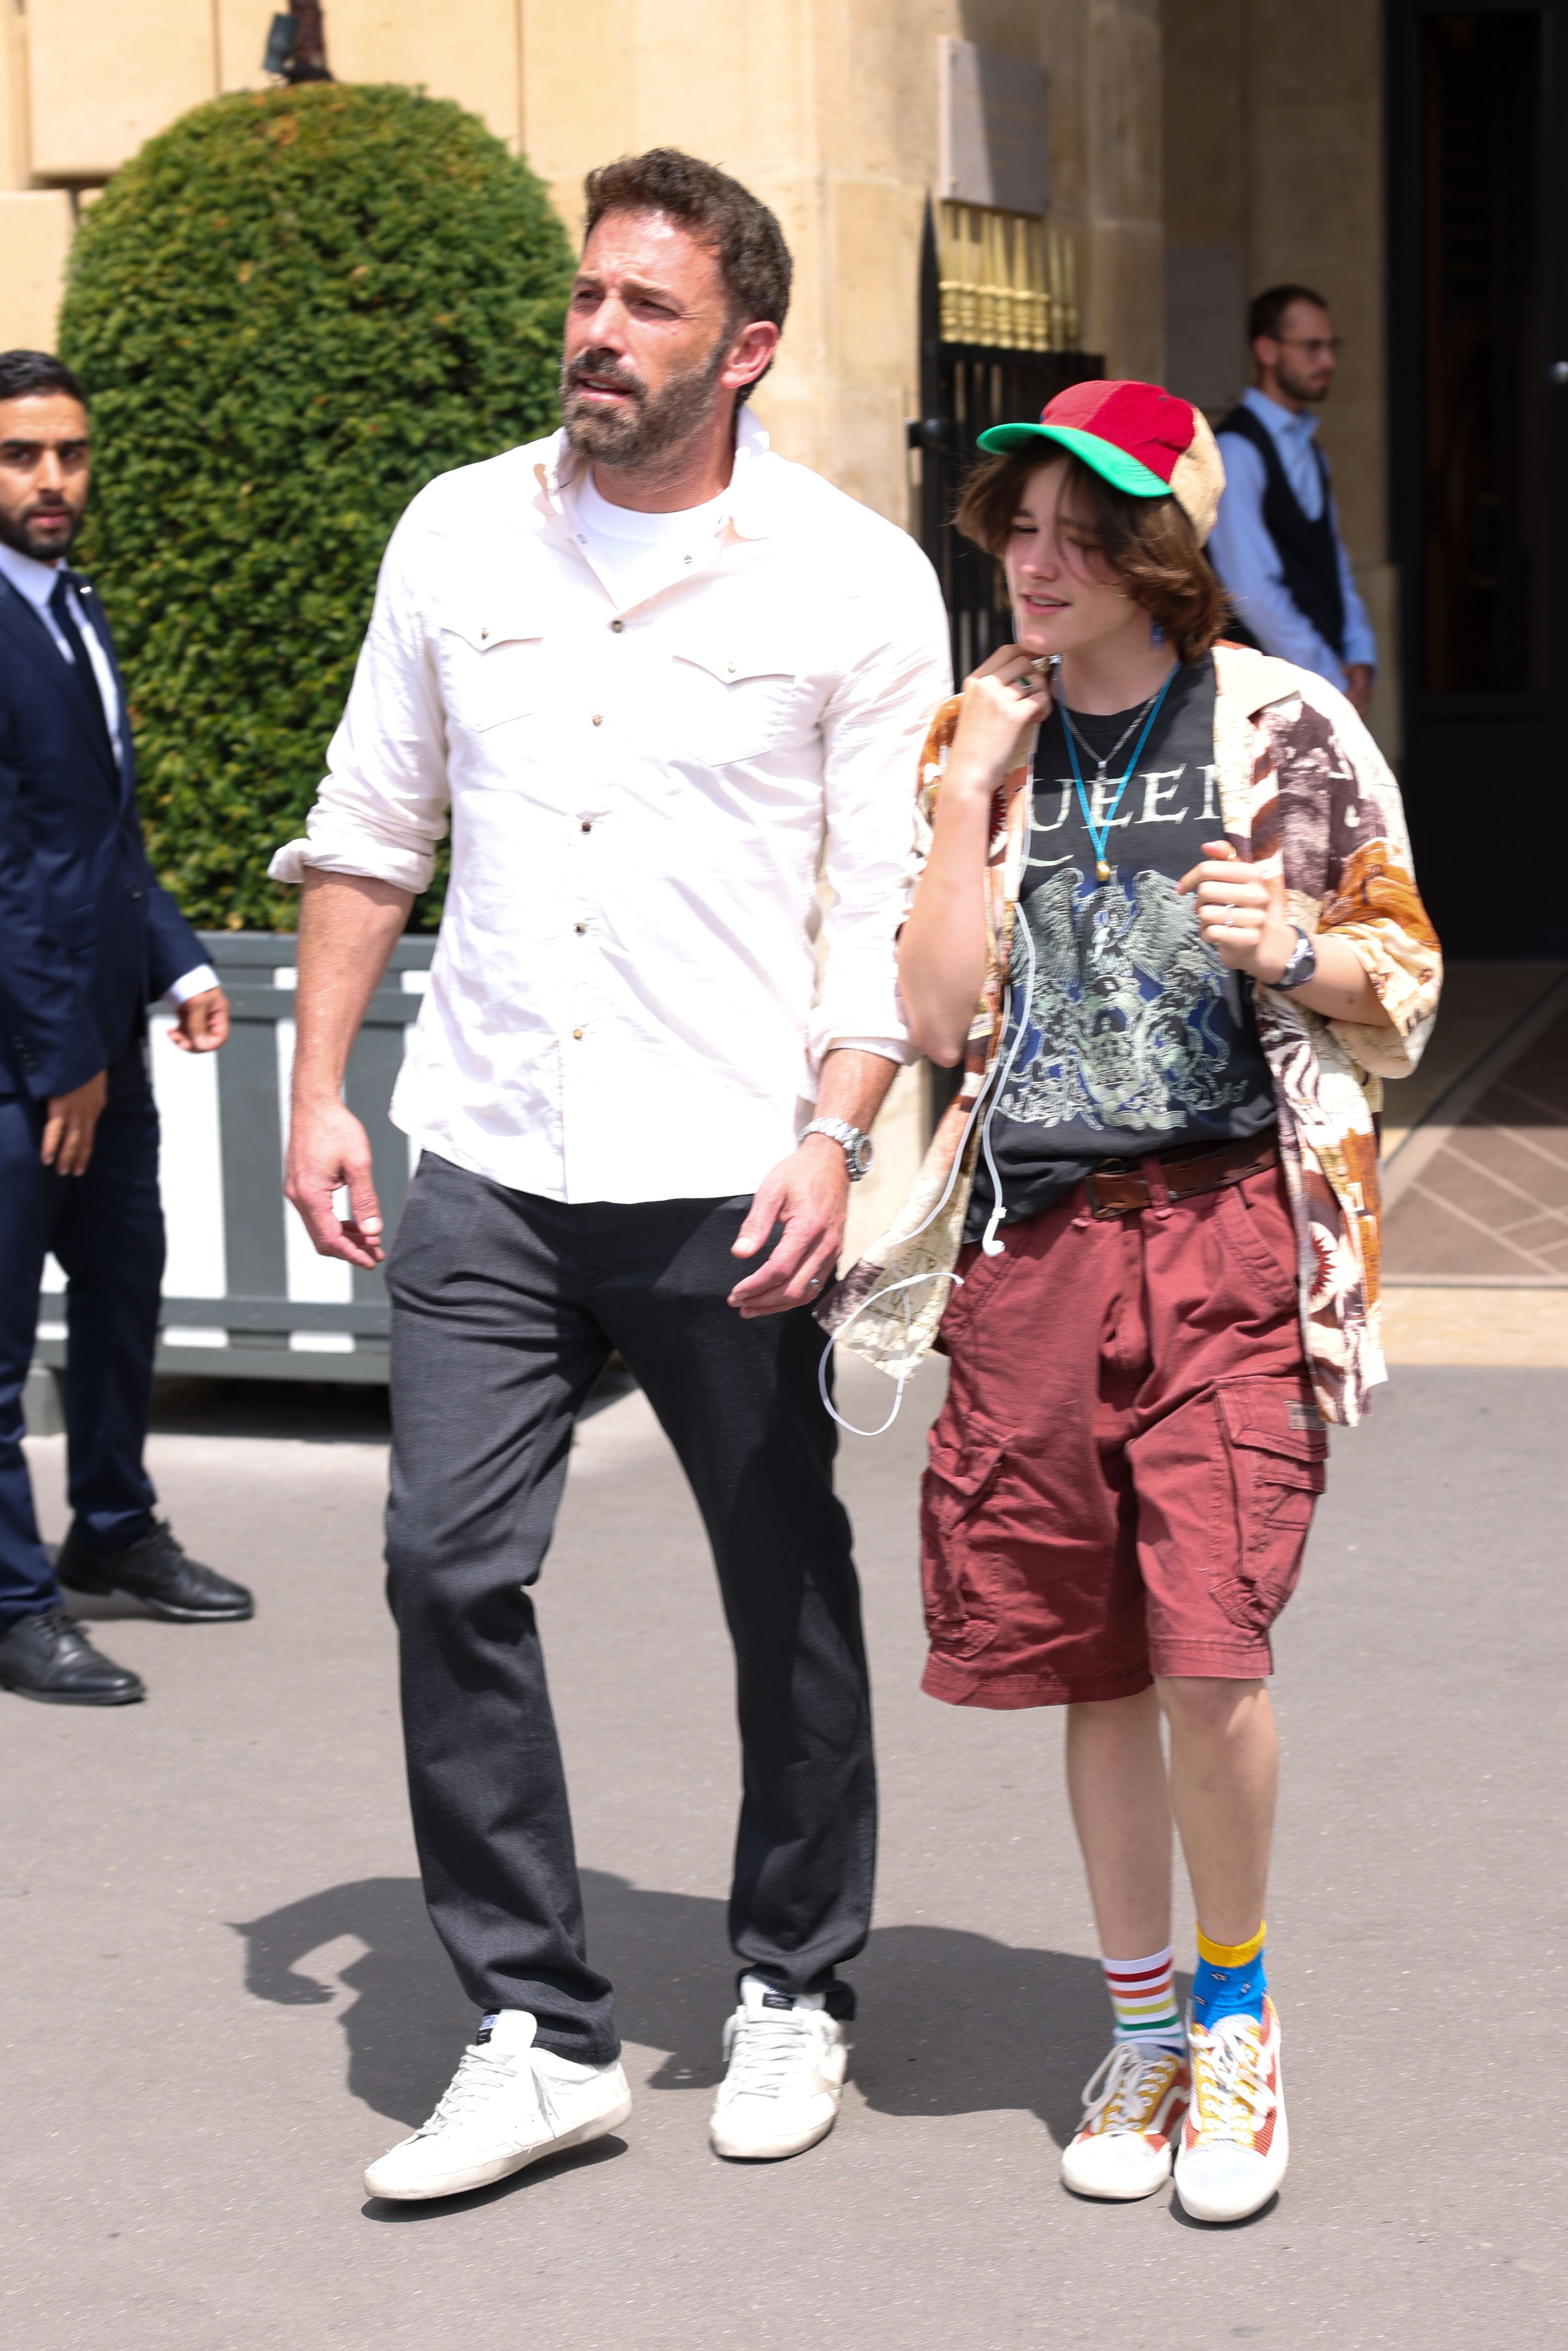 Ben Affleck and Seraphina Affleck leaving their hotel in Paris, France on July 25, 2022 | Source: Getty Images